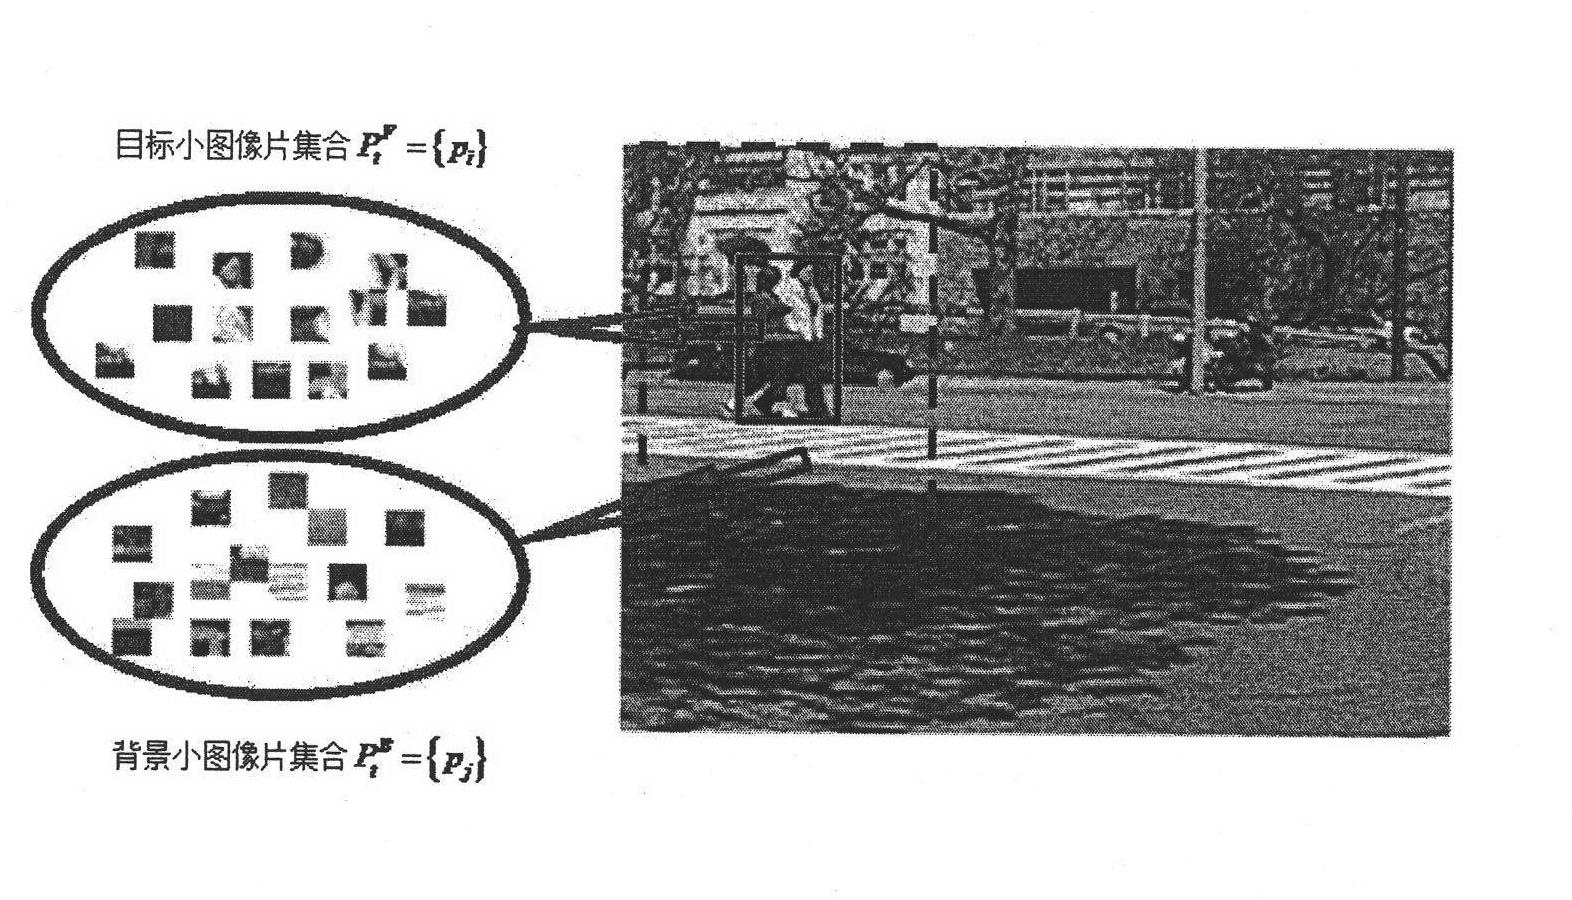 Local distance study and sequencing queue-based visual target tracking method